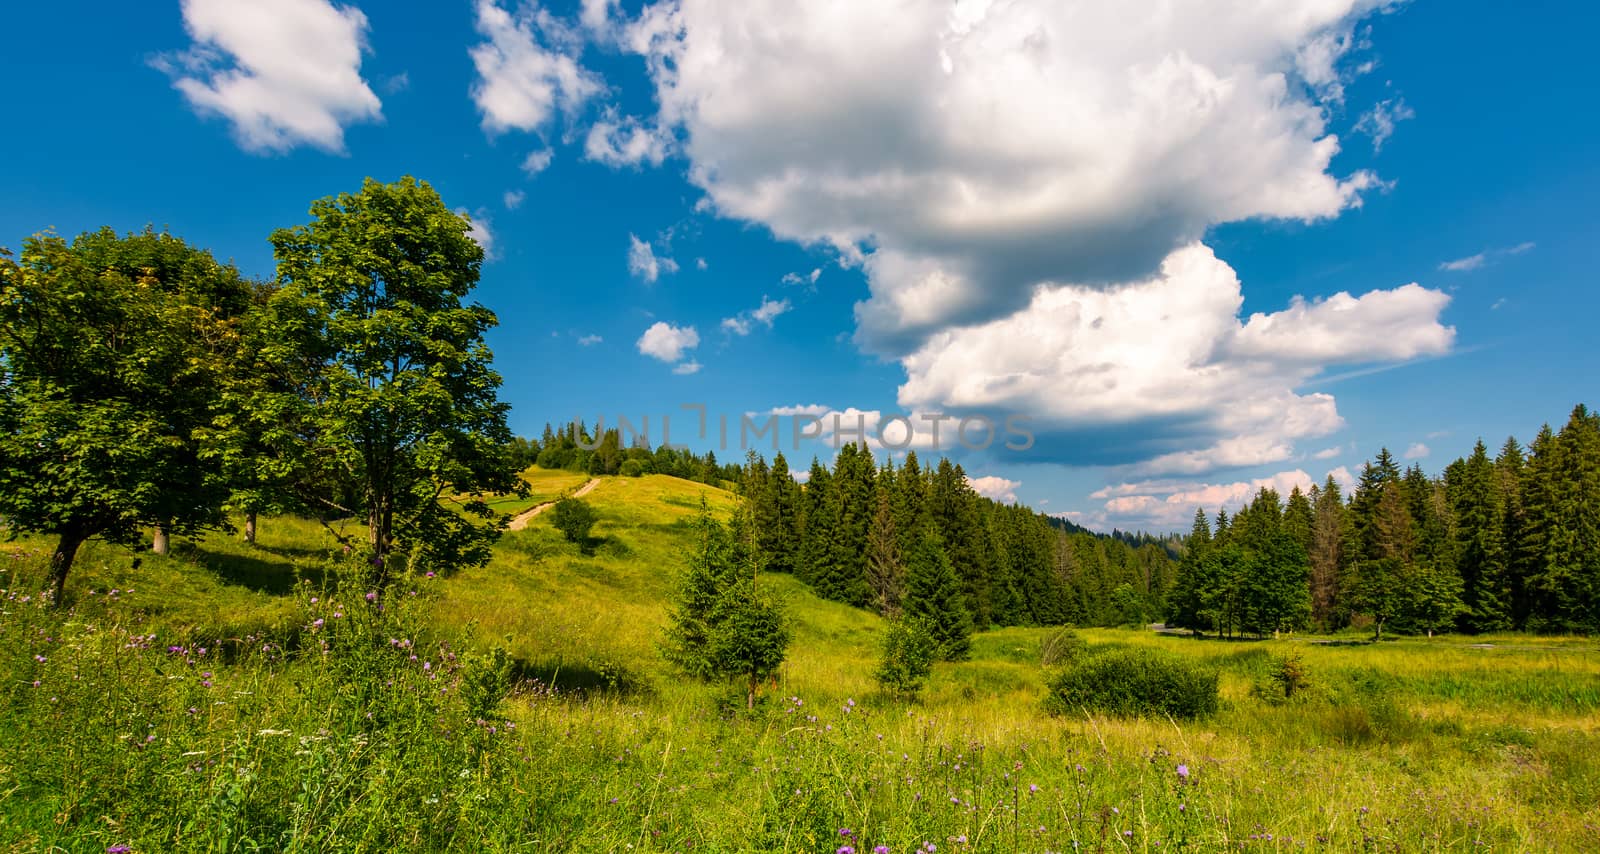 grassy meadow among the forested hills by Pellinni